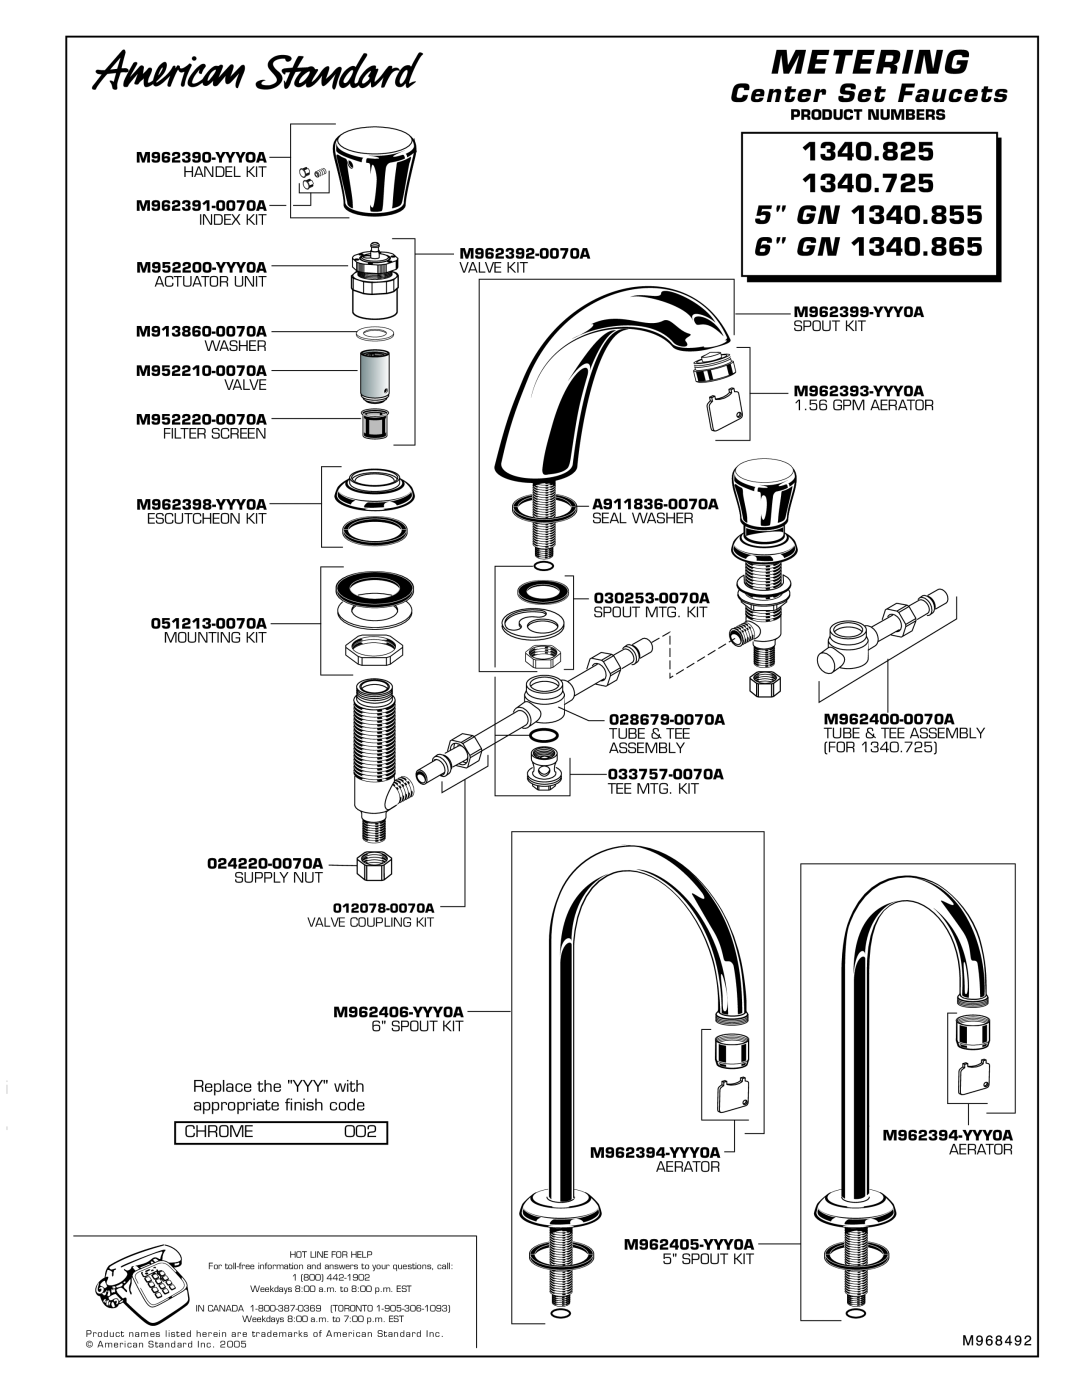 American Standard manual Metering, Center Set Faucets, 1340.825 1340.725 5 GN 1340.855 6 GN, CHROME002 